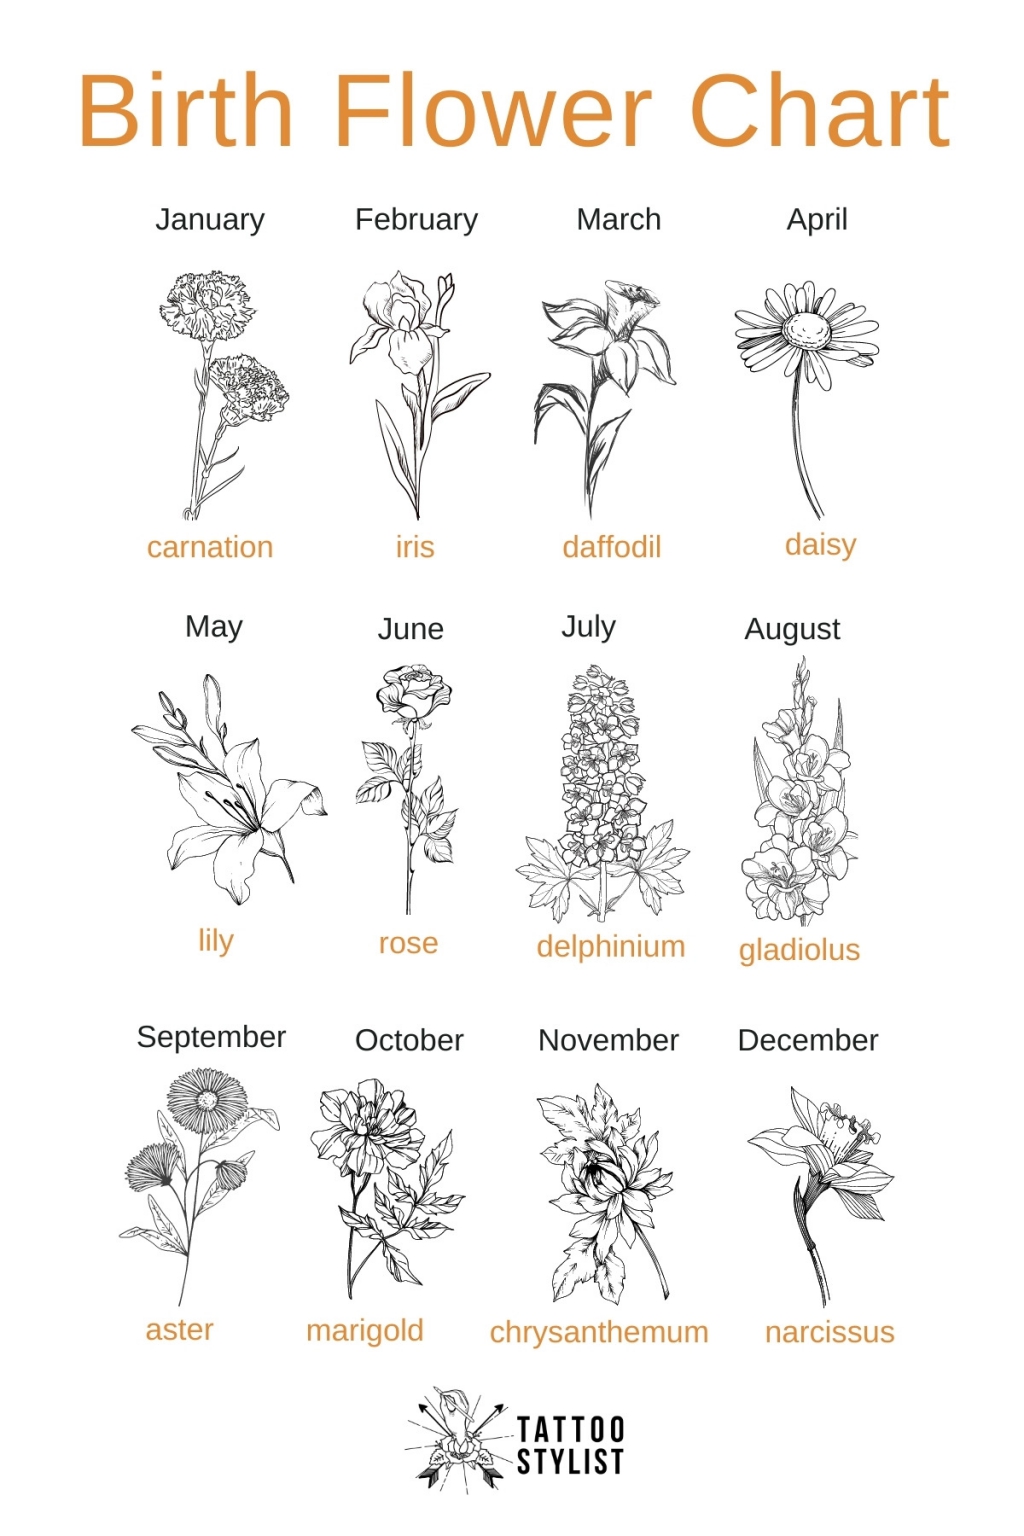 Every Tattoo Has A Story - How Did Birth Flowers Came To Be? 